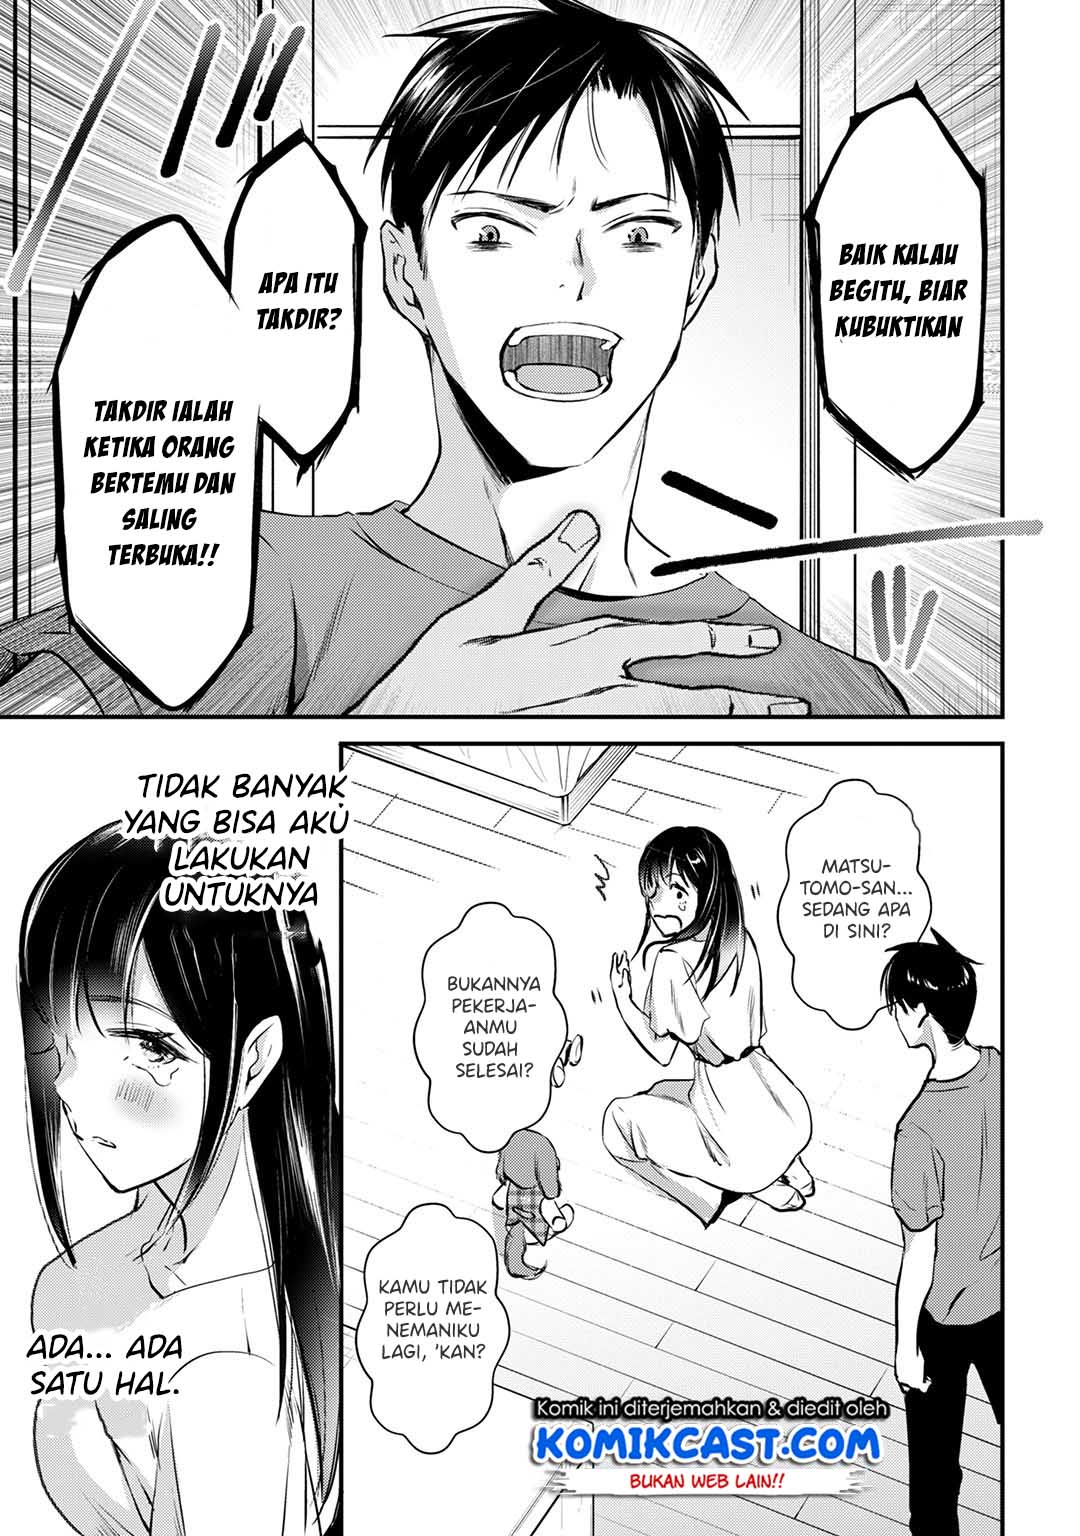 It’s Fun Having a 300,000 yen a Month Job Welcoming Home an Onee-san Who Doesn’t Find Meaning in a Job That Pays Her 500,000 yen a Month Chapter 3